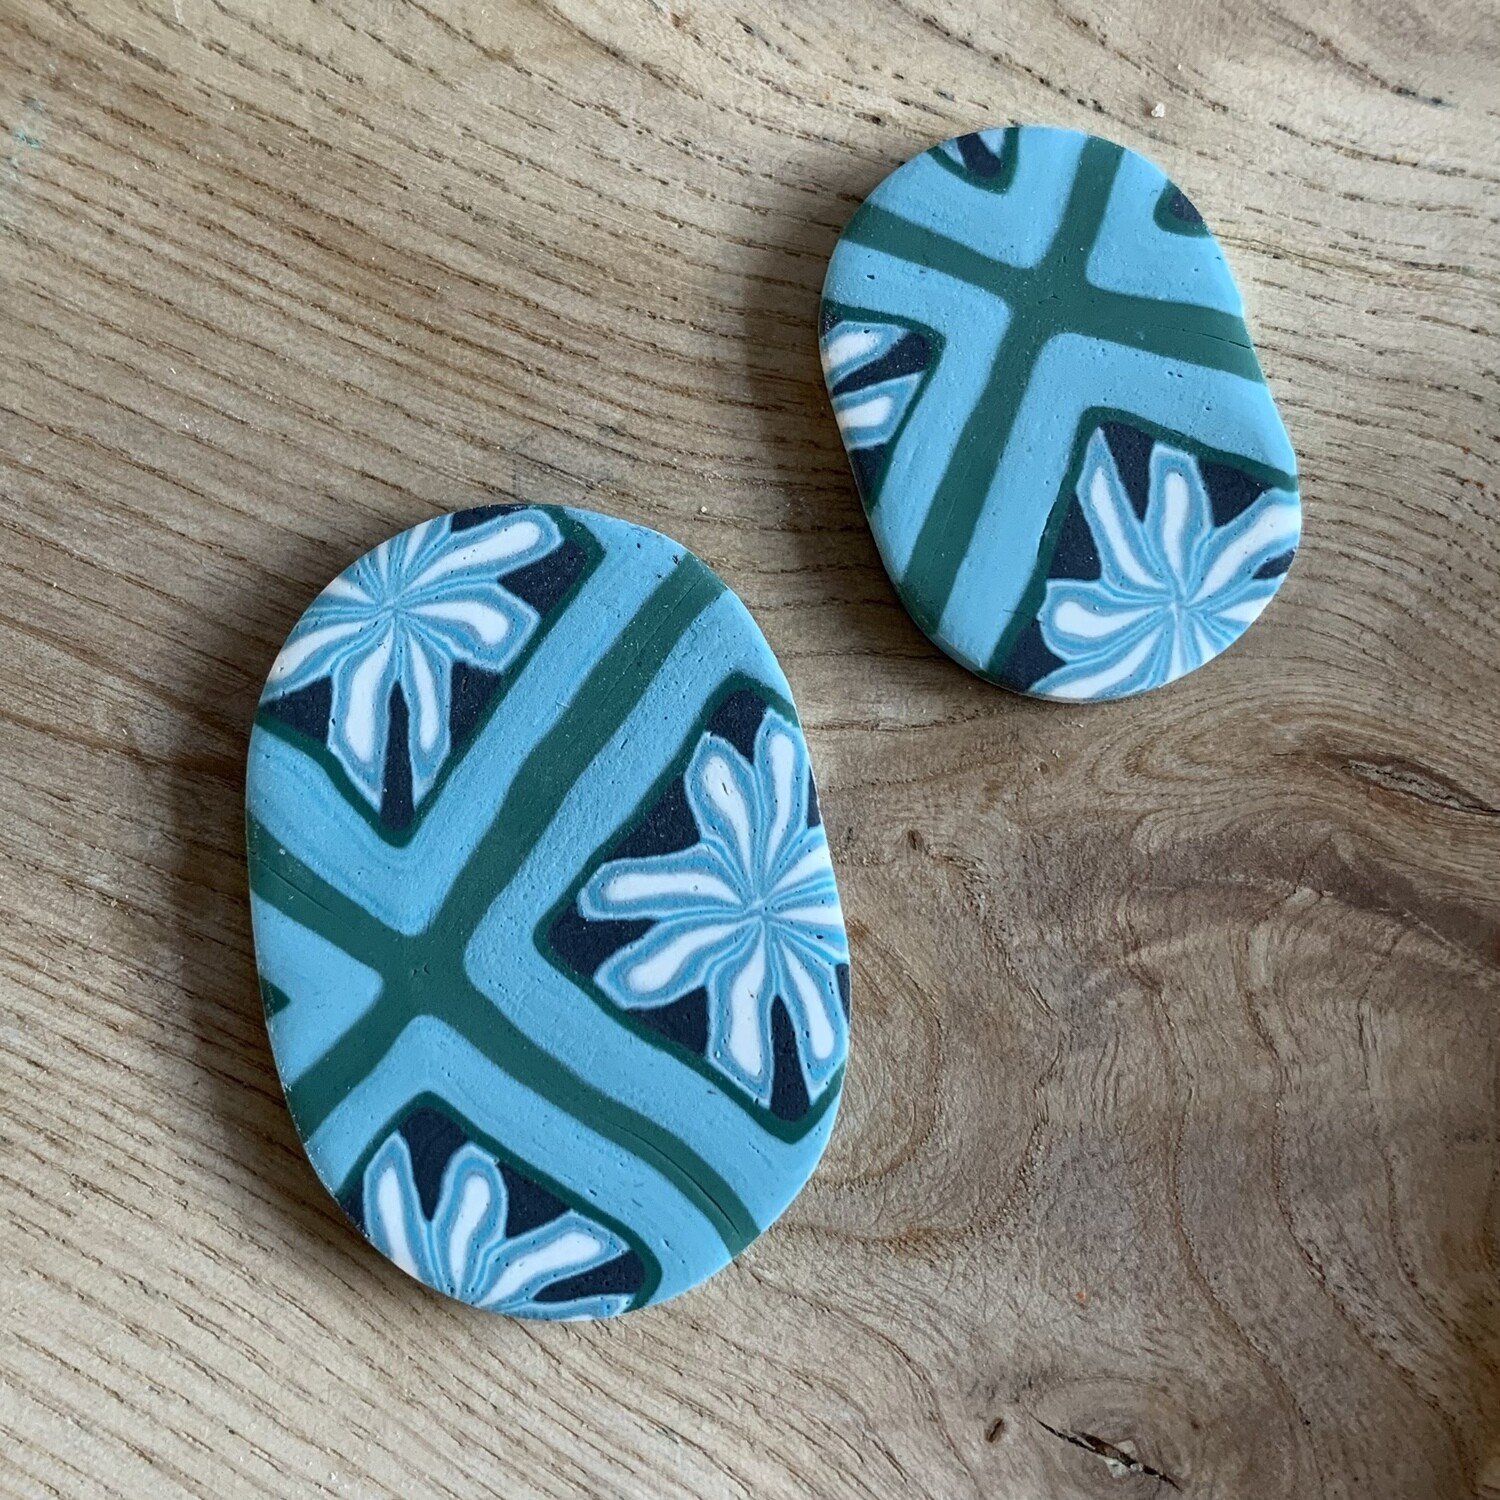 Art & Design Teacher CPD Course - Polymer Clay - One to One - 1 Day